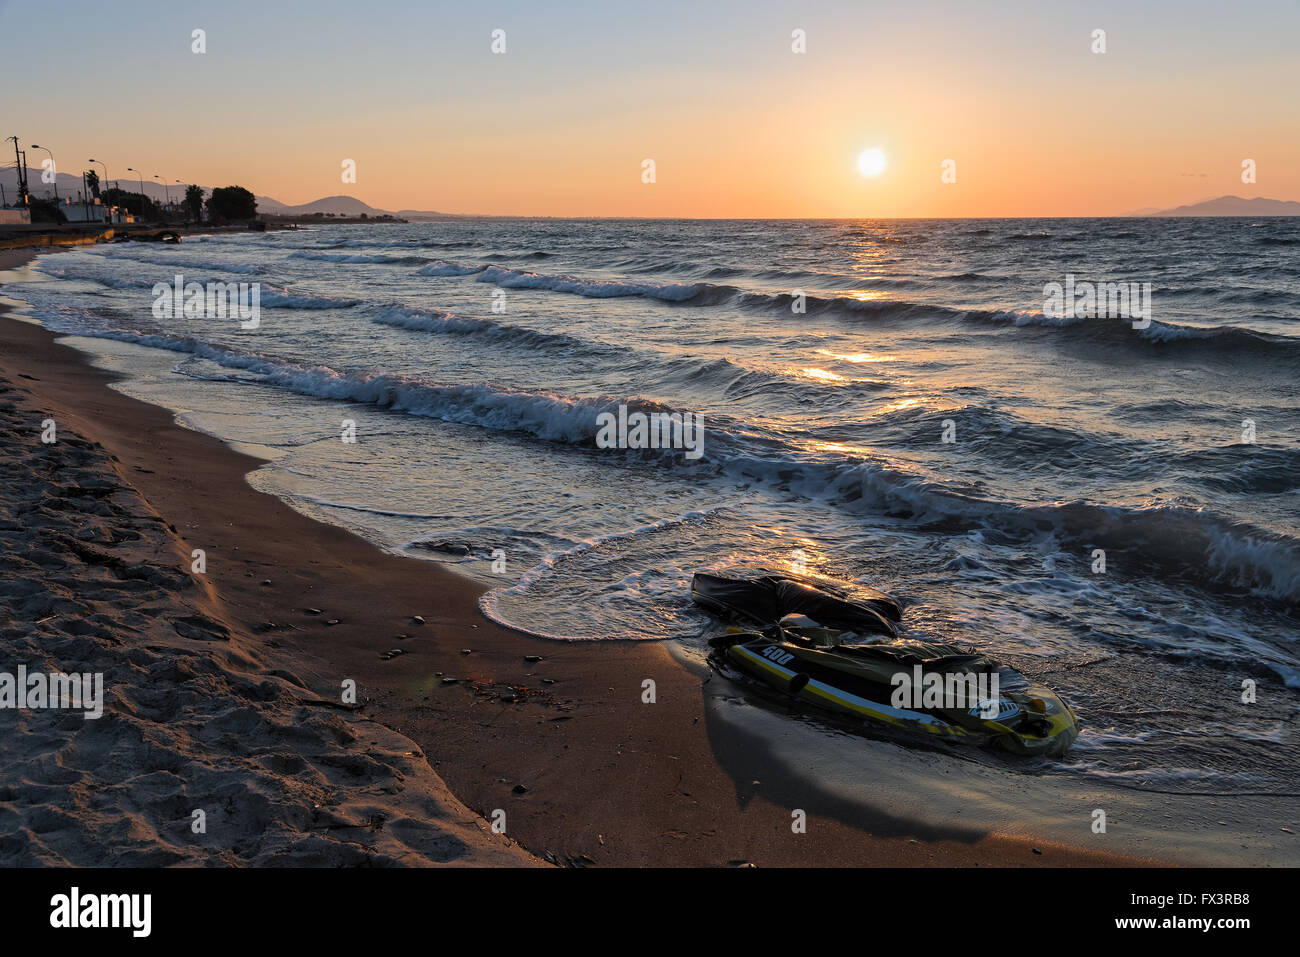 Damaged plastic boat of refugees on October 14, 2015 on a beach of Kos island, Greece. Stock Photo